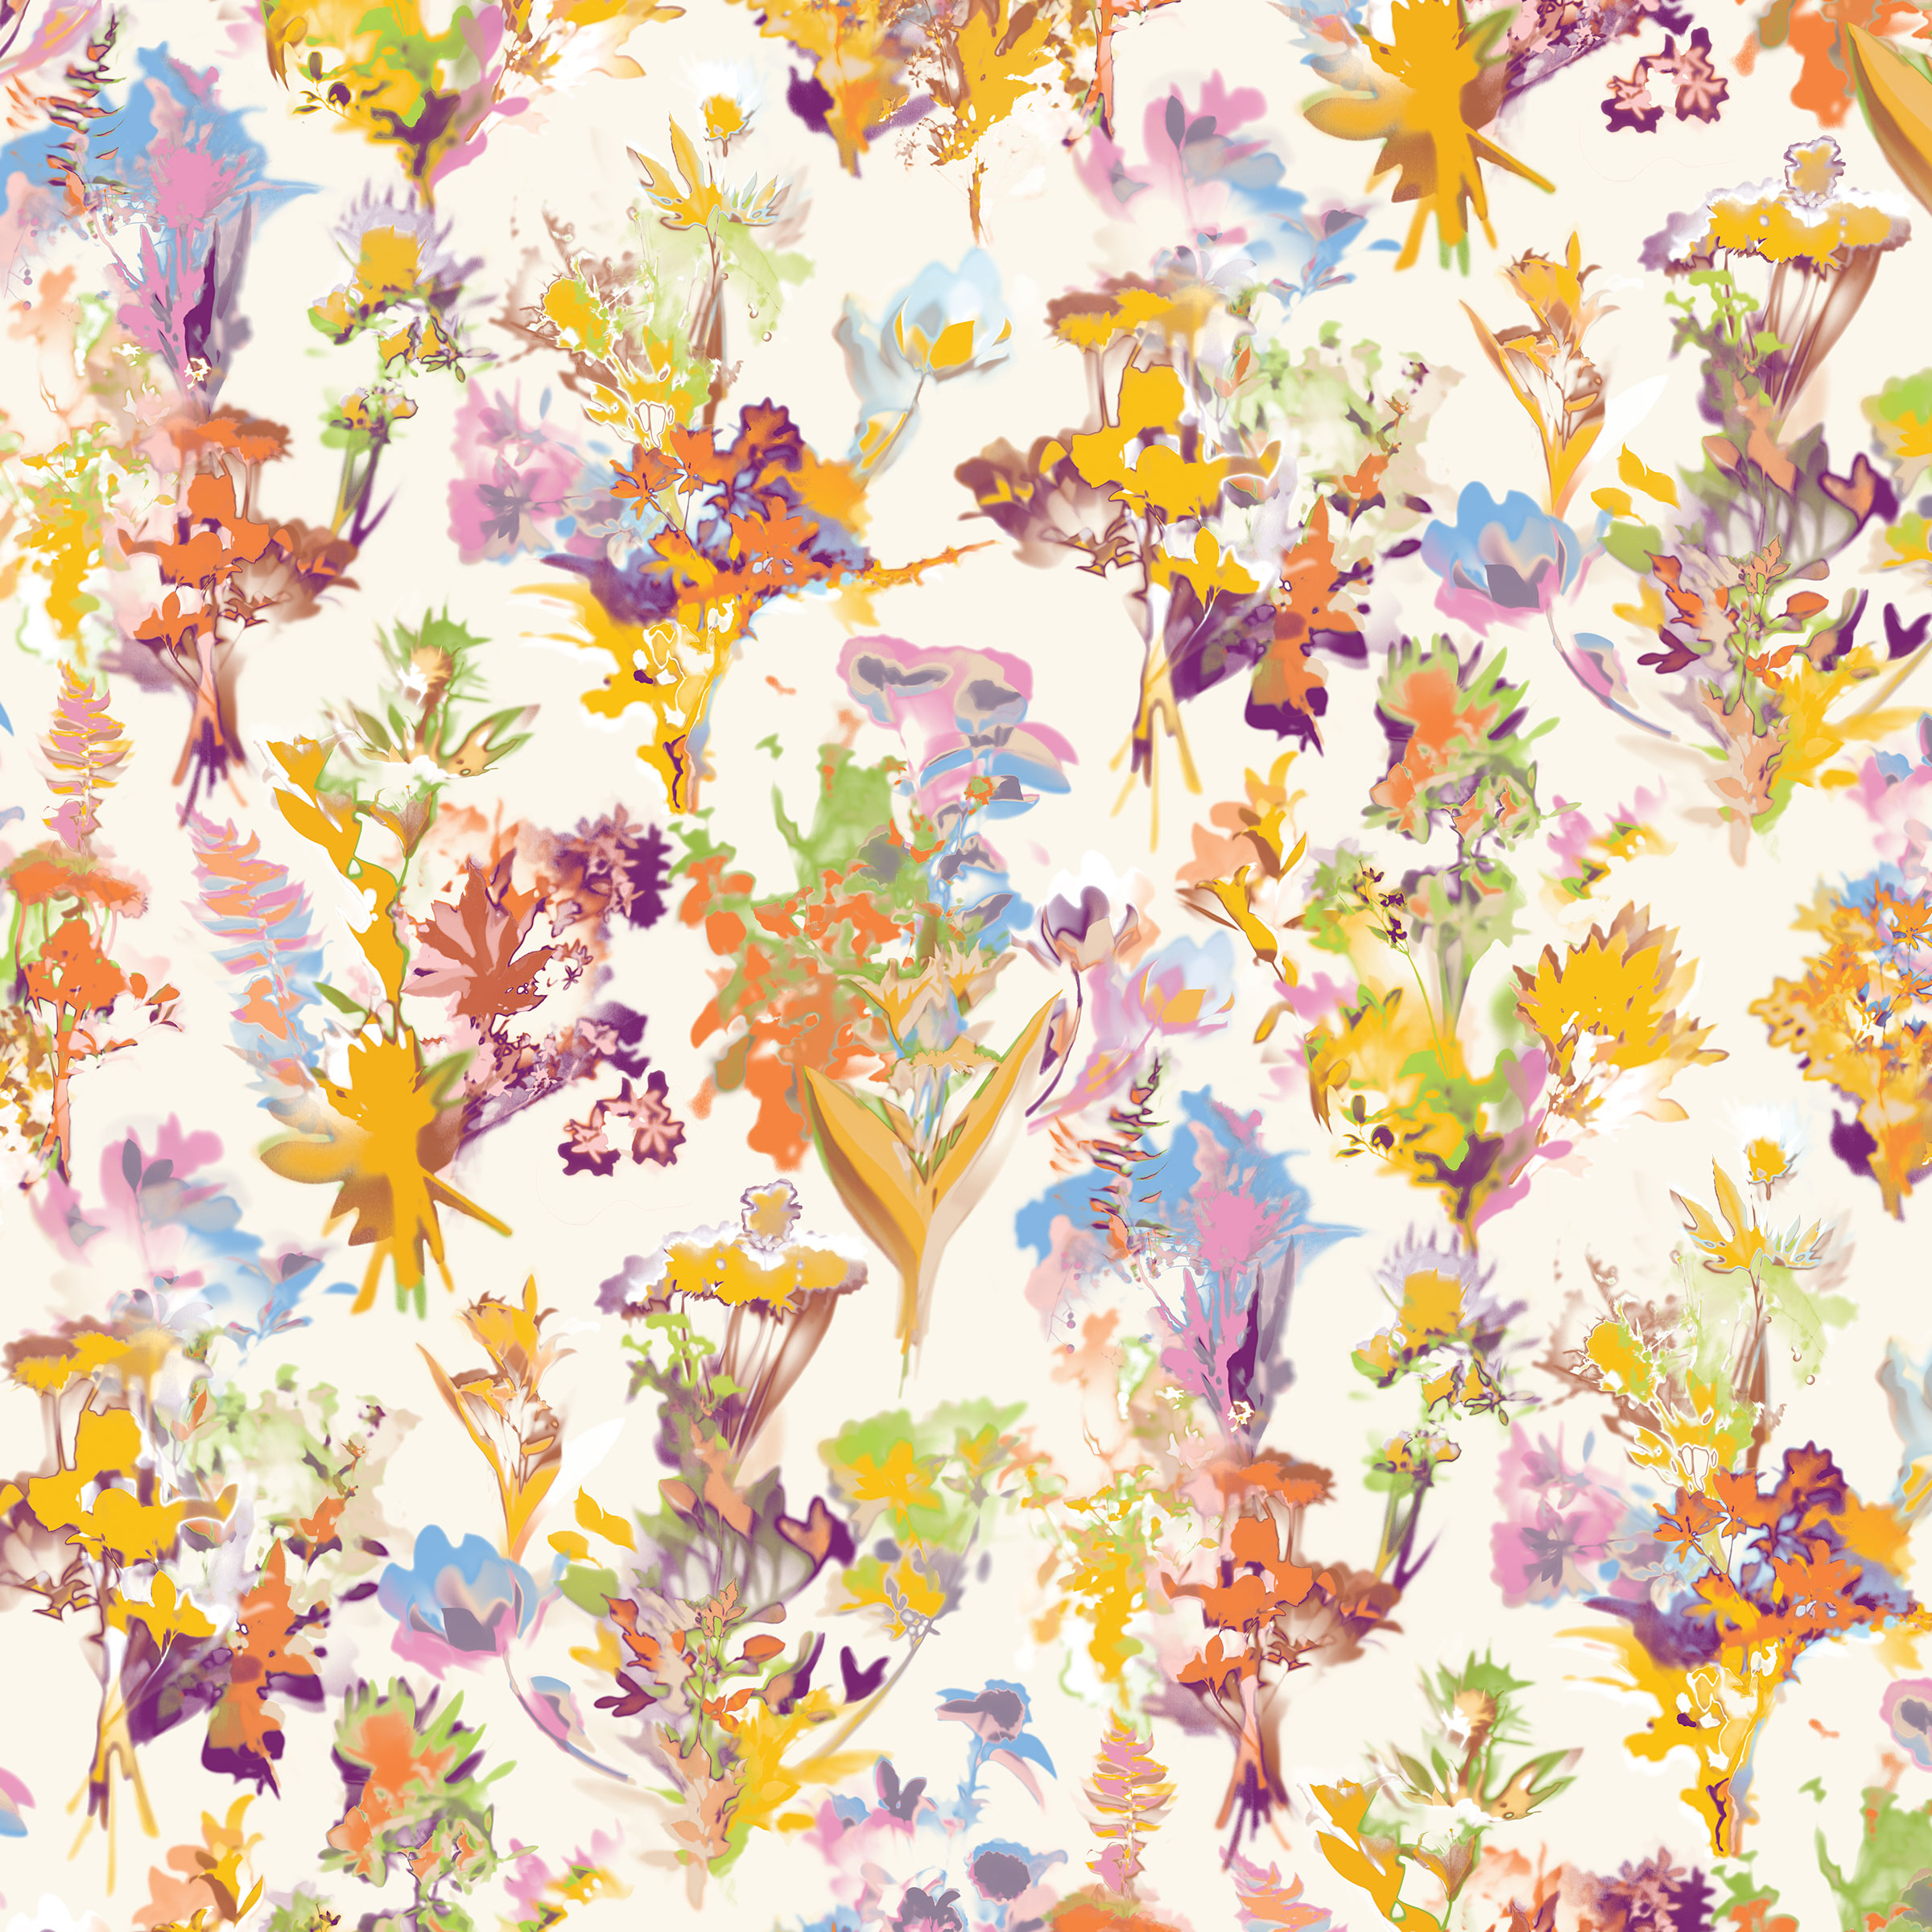 Floral upholstery pattern for interior design. Neutral colourway.